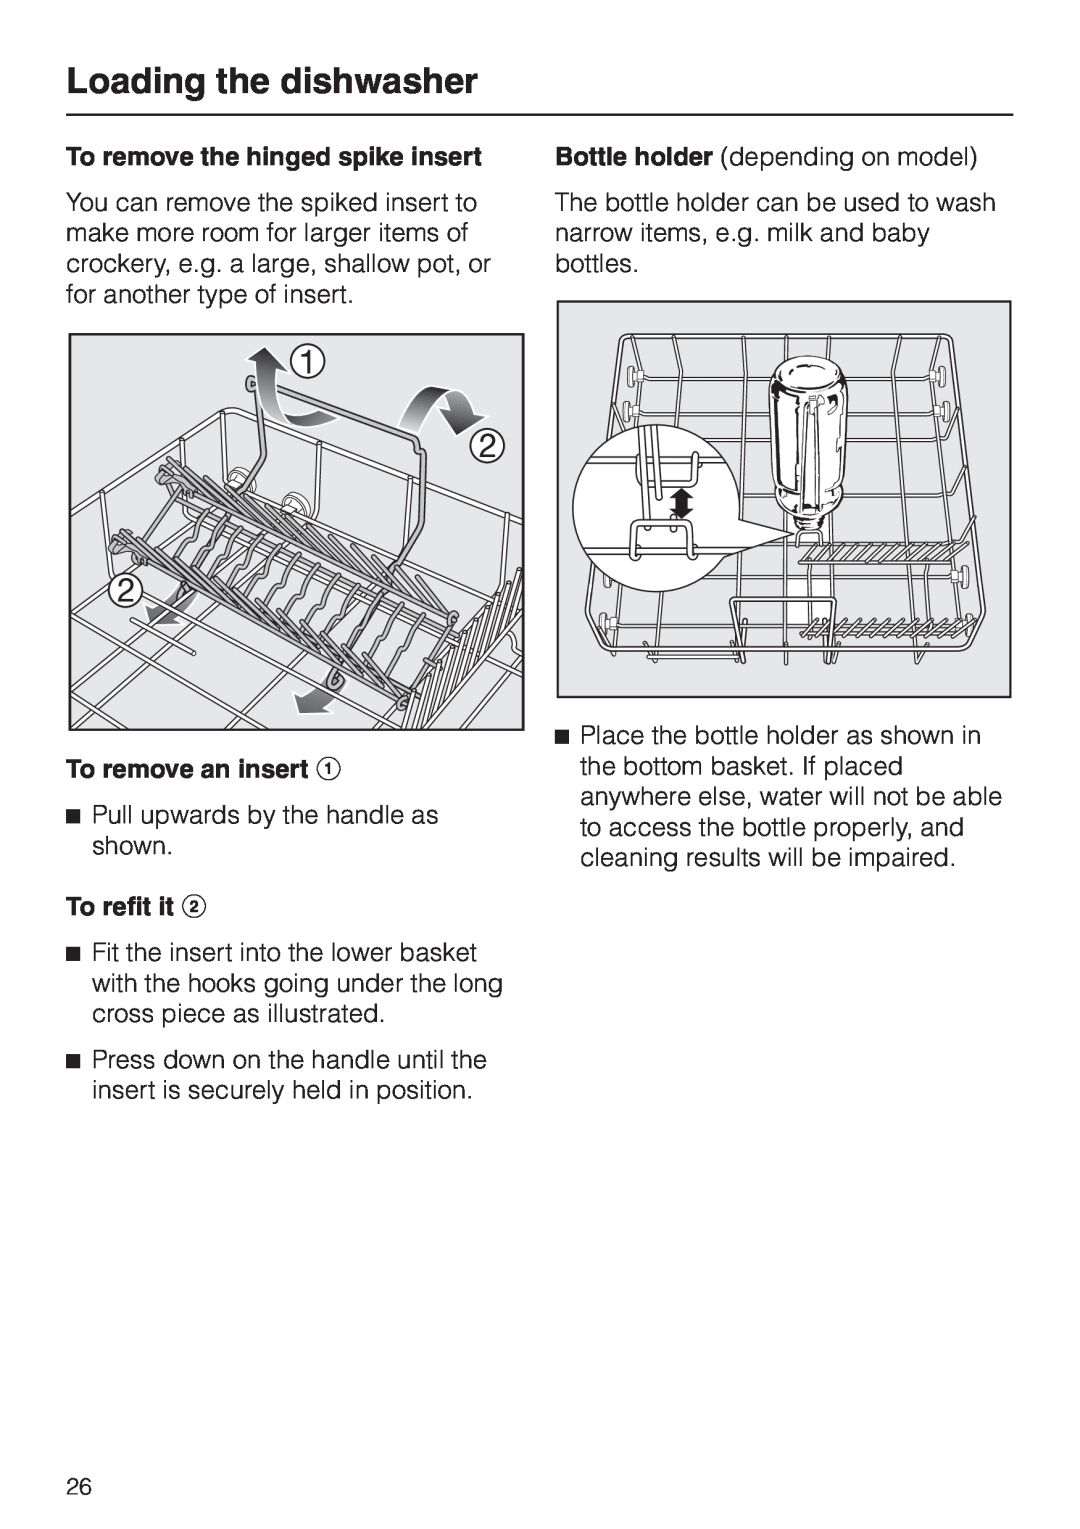 Miele 06 702 810 manual Loading the dishwasher, To remove the hinged spike insert, To remove an insert a, To refit it b 